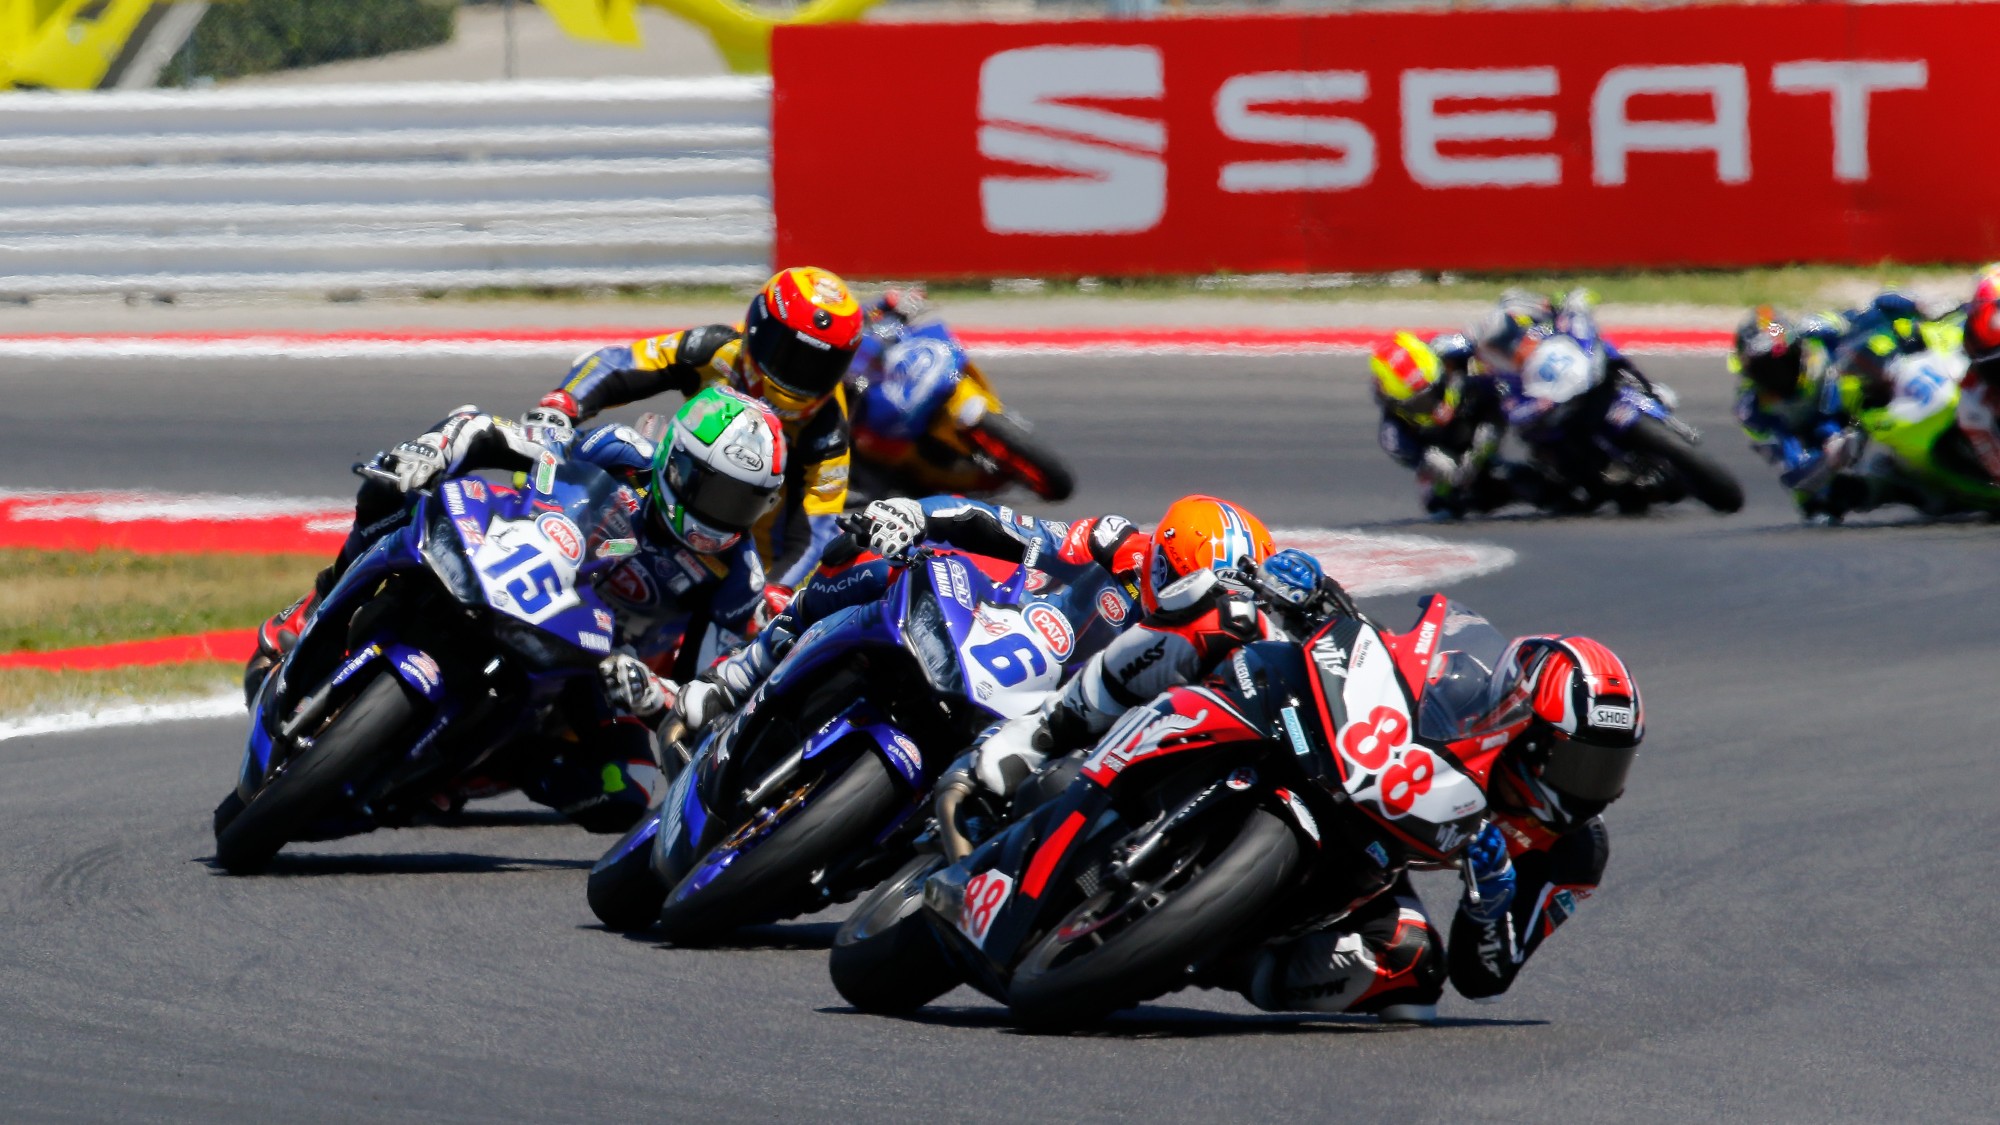 WorldSSP300: A lineup of riders leaning into the twisties